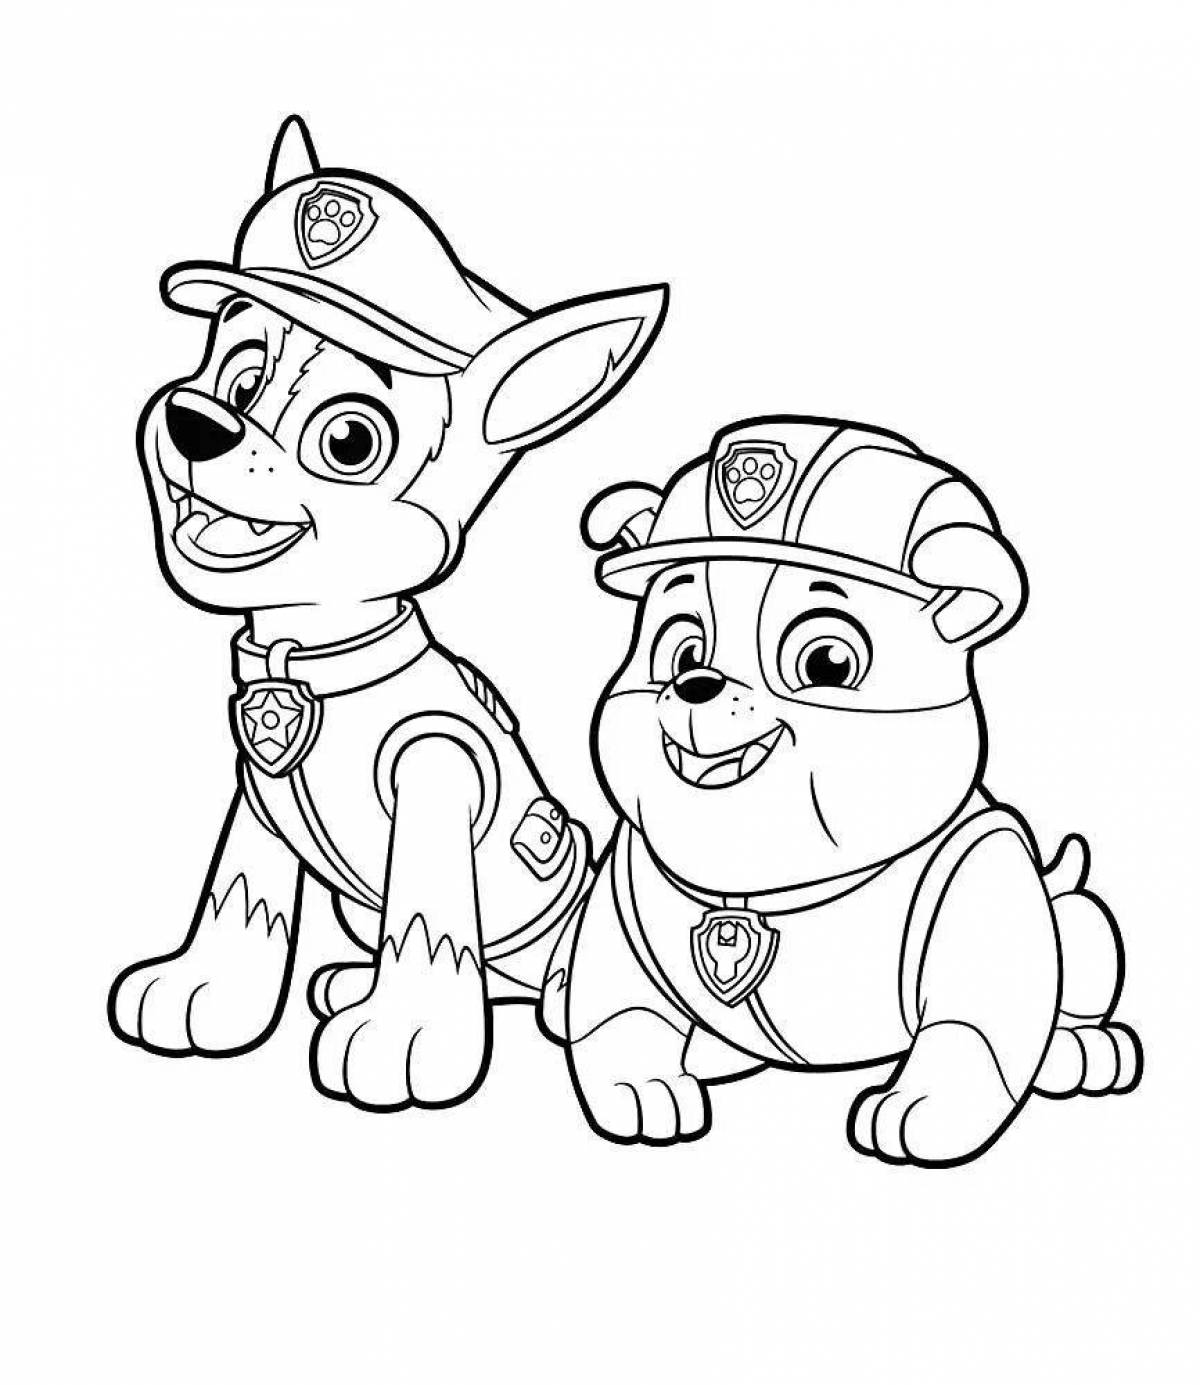 Puppy Patrol magic coloring book for 5 year olds